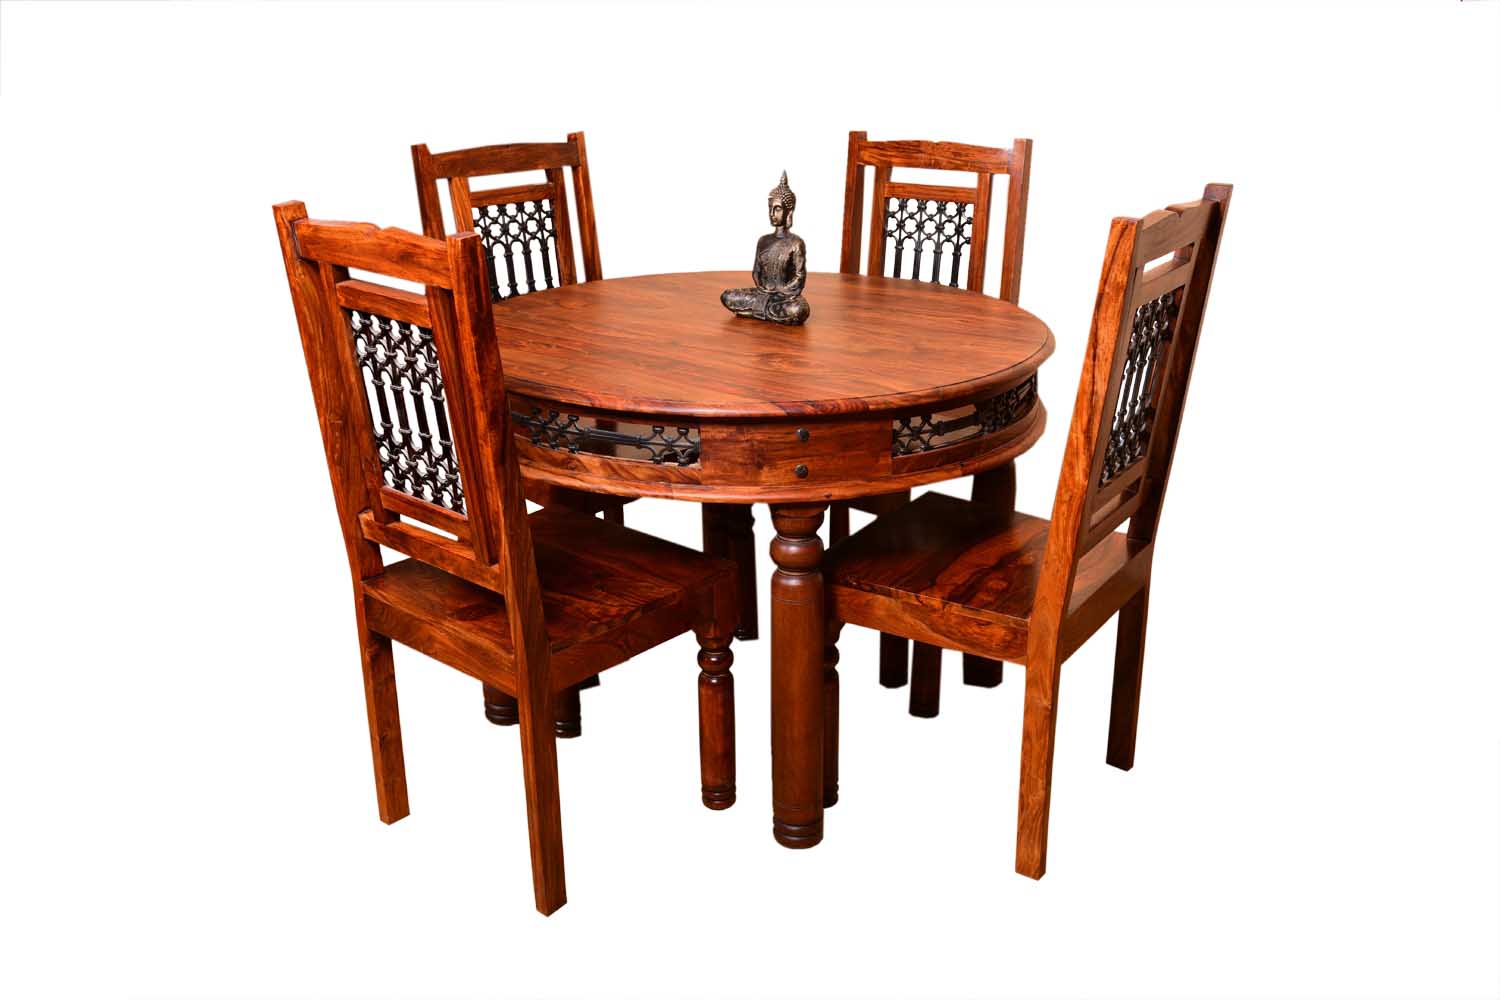 Buy 4 Seater Vintage Round Dining Table Set | Dining Room, 4 Seater